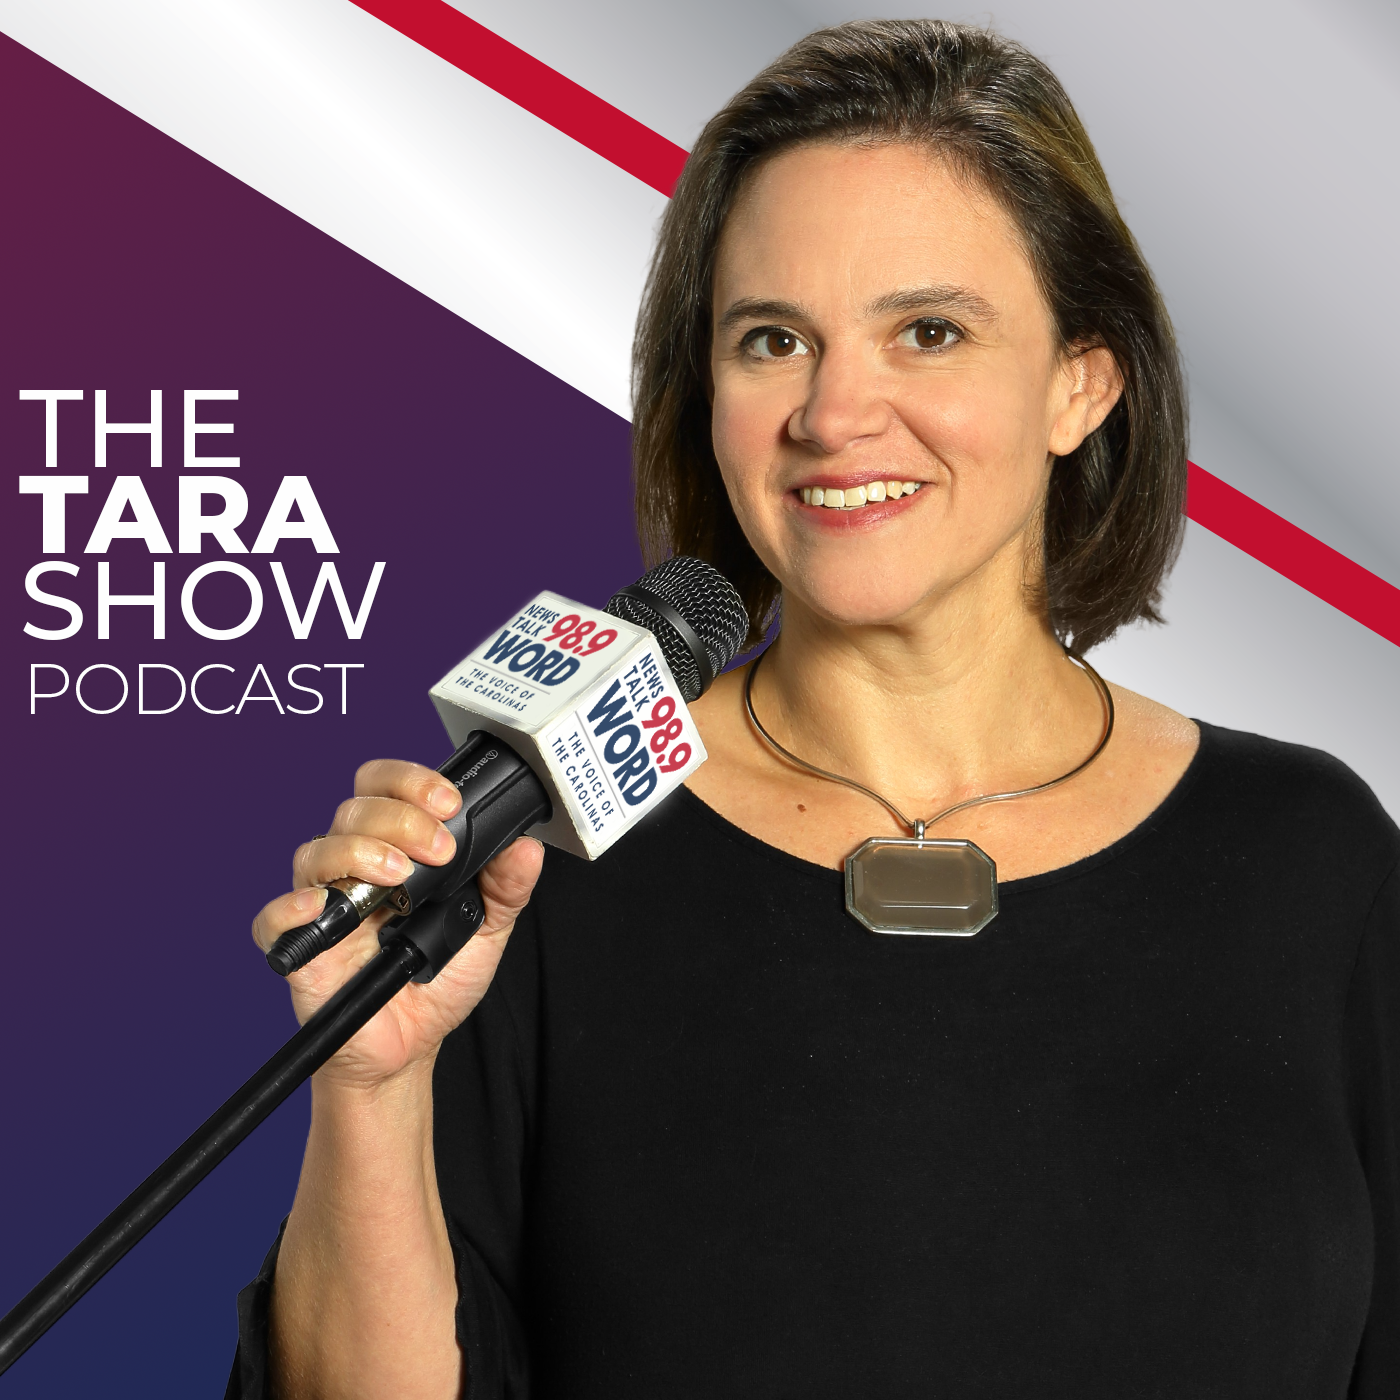 Hour 2: The Tara Show - “There’s NO Crime Here” “The Number 1 Issue in America” “The Problem with Presidential Immunity” “Amazon Math” 